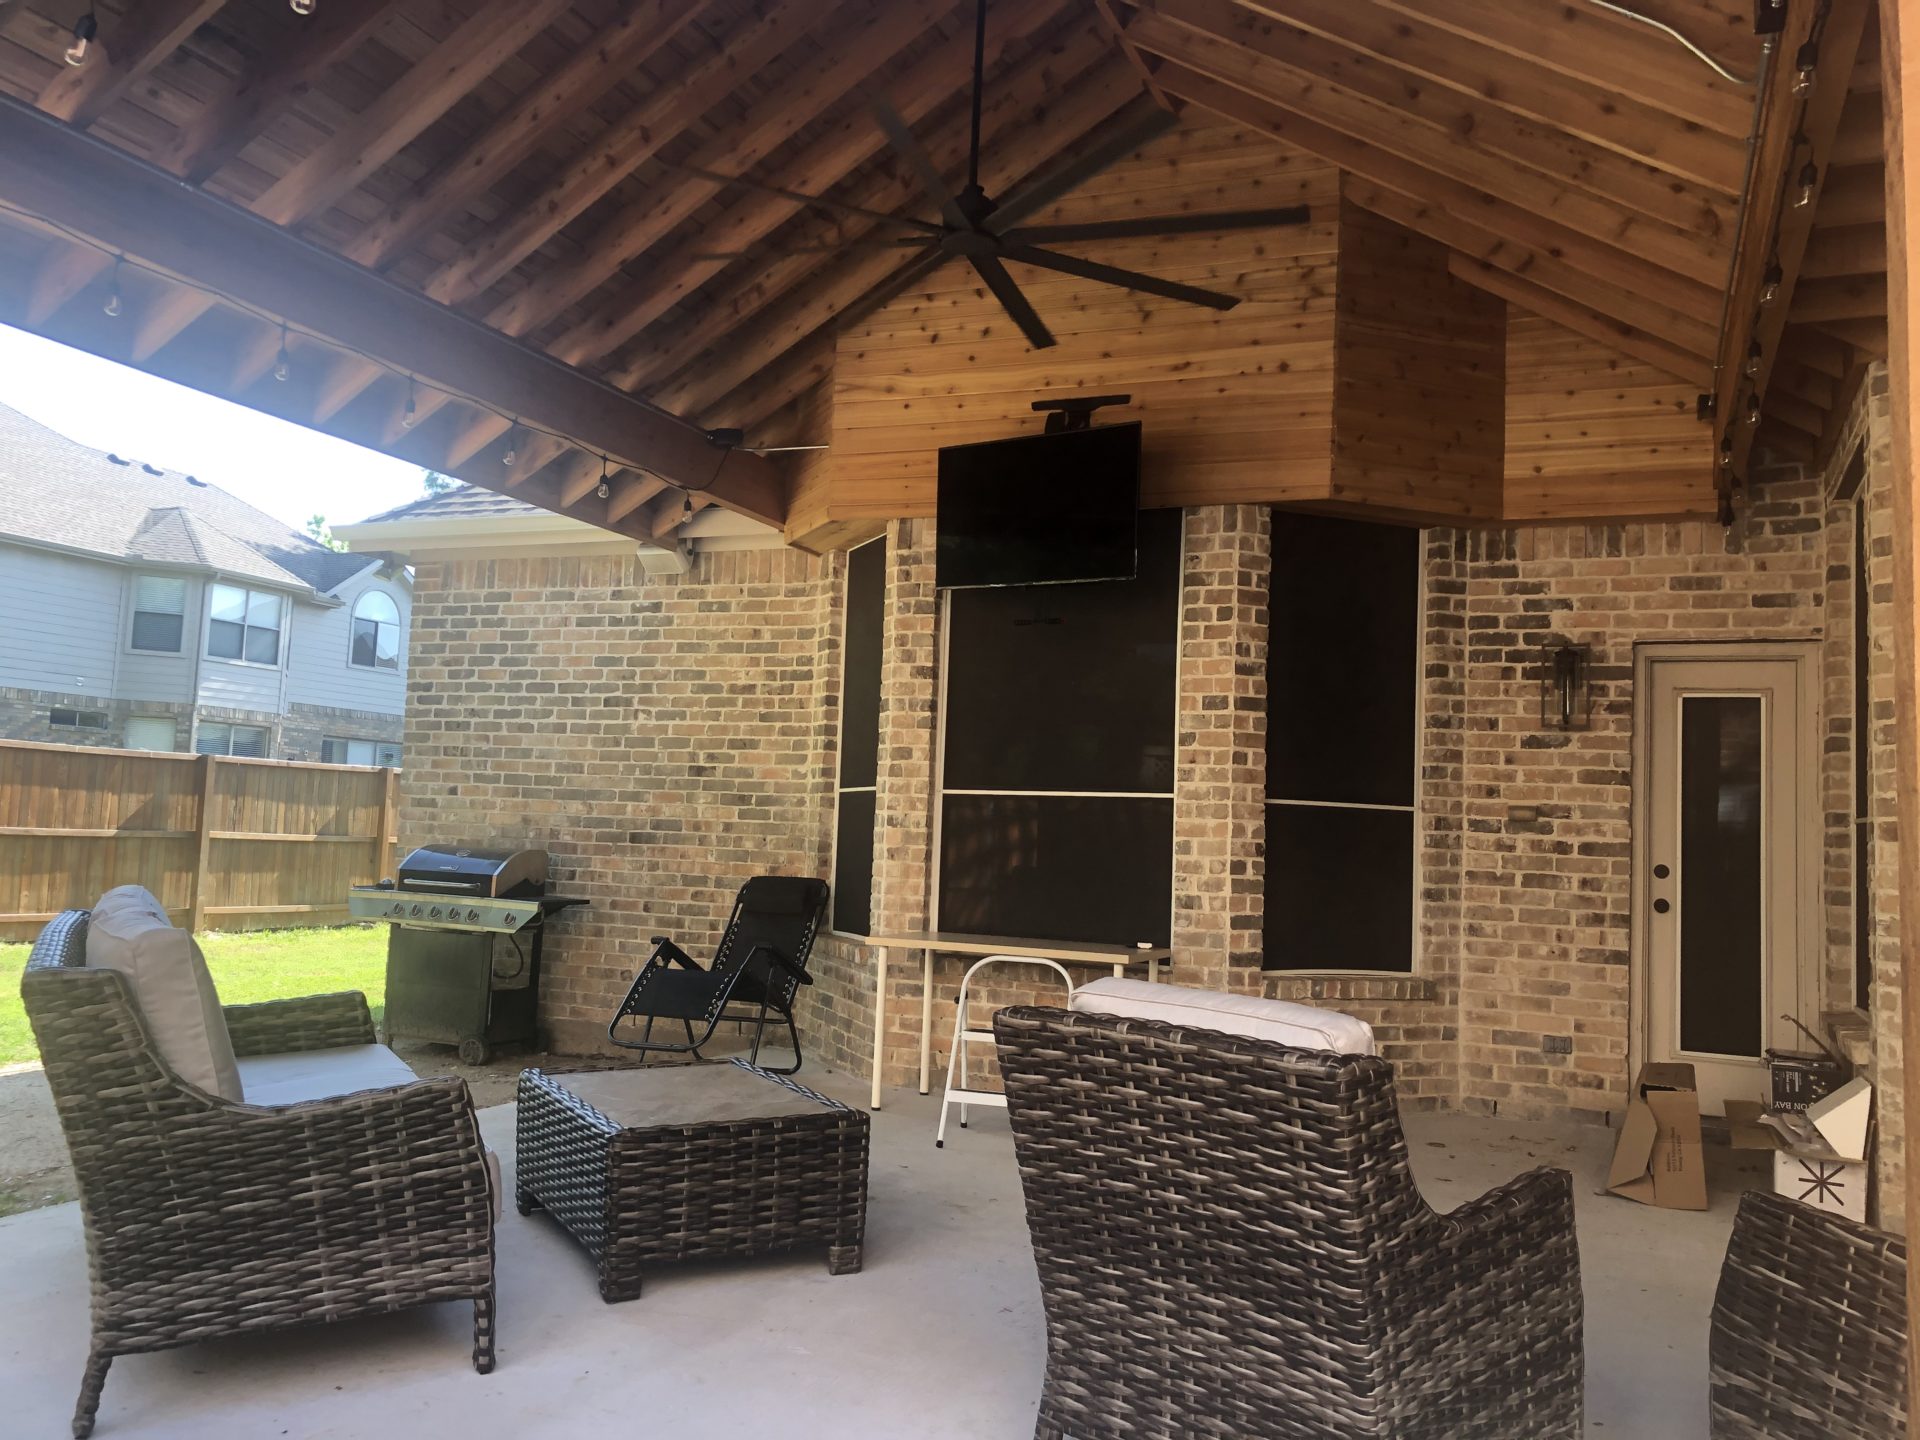 Finished outdoor patio with Pavilion style roof that extends home in Dallas Fort Worth's outdoor living space. Patio installation includes outdoor ceiling fan, tv, patio furniture, and more.